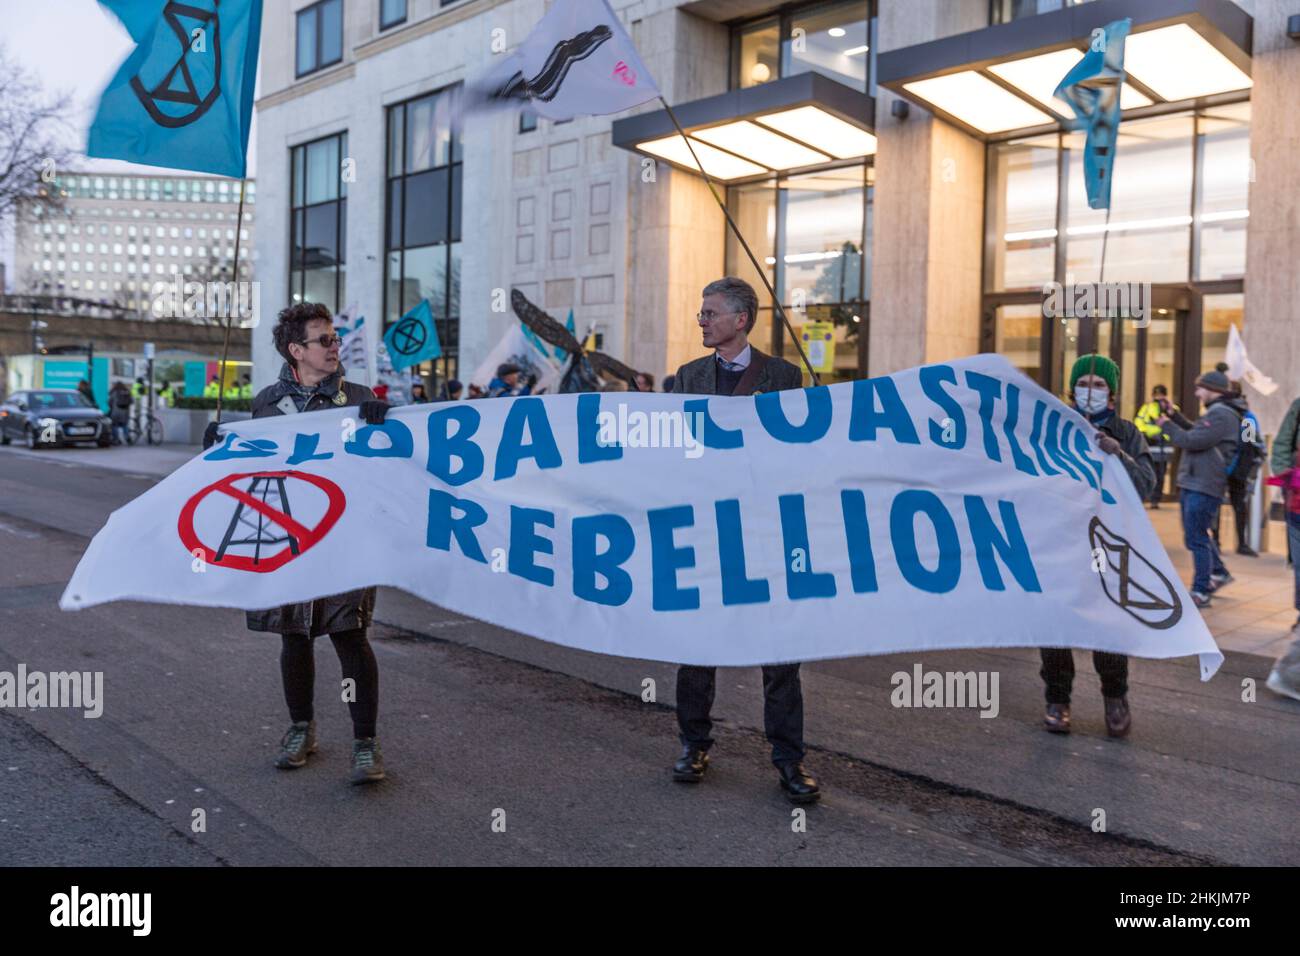 London, UK. 04th Feb 2022, Global Coastline Rebellion / Extinction Rebellion protesters in front of the Shell Centre on London's South Bank. Credit: Antony Meadley/Alamy Live News Stock Photo